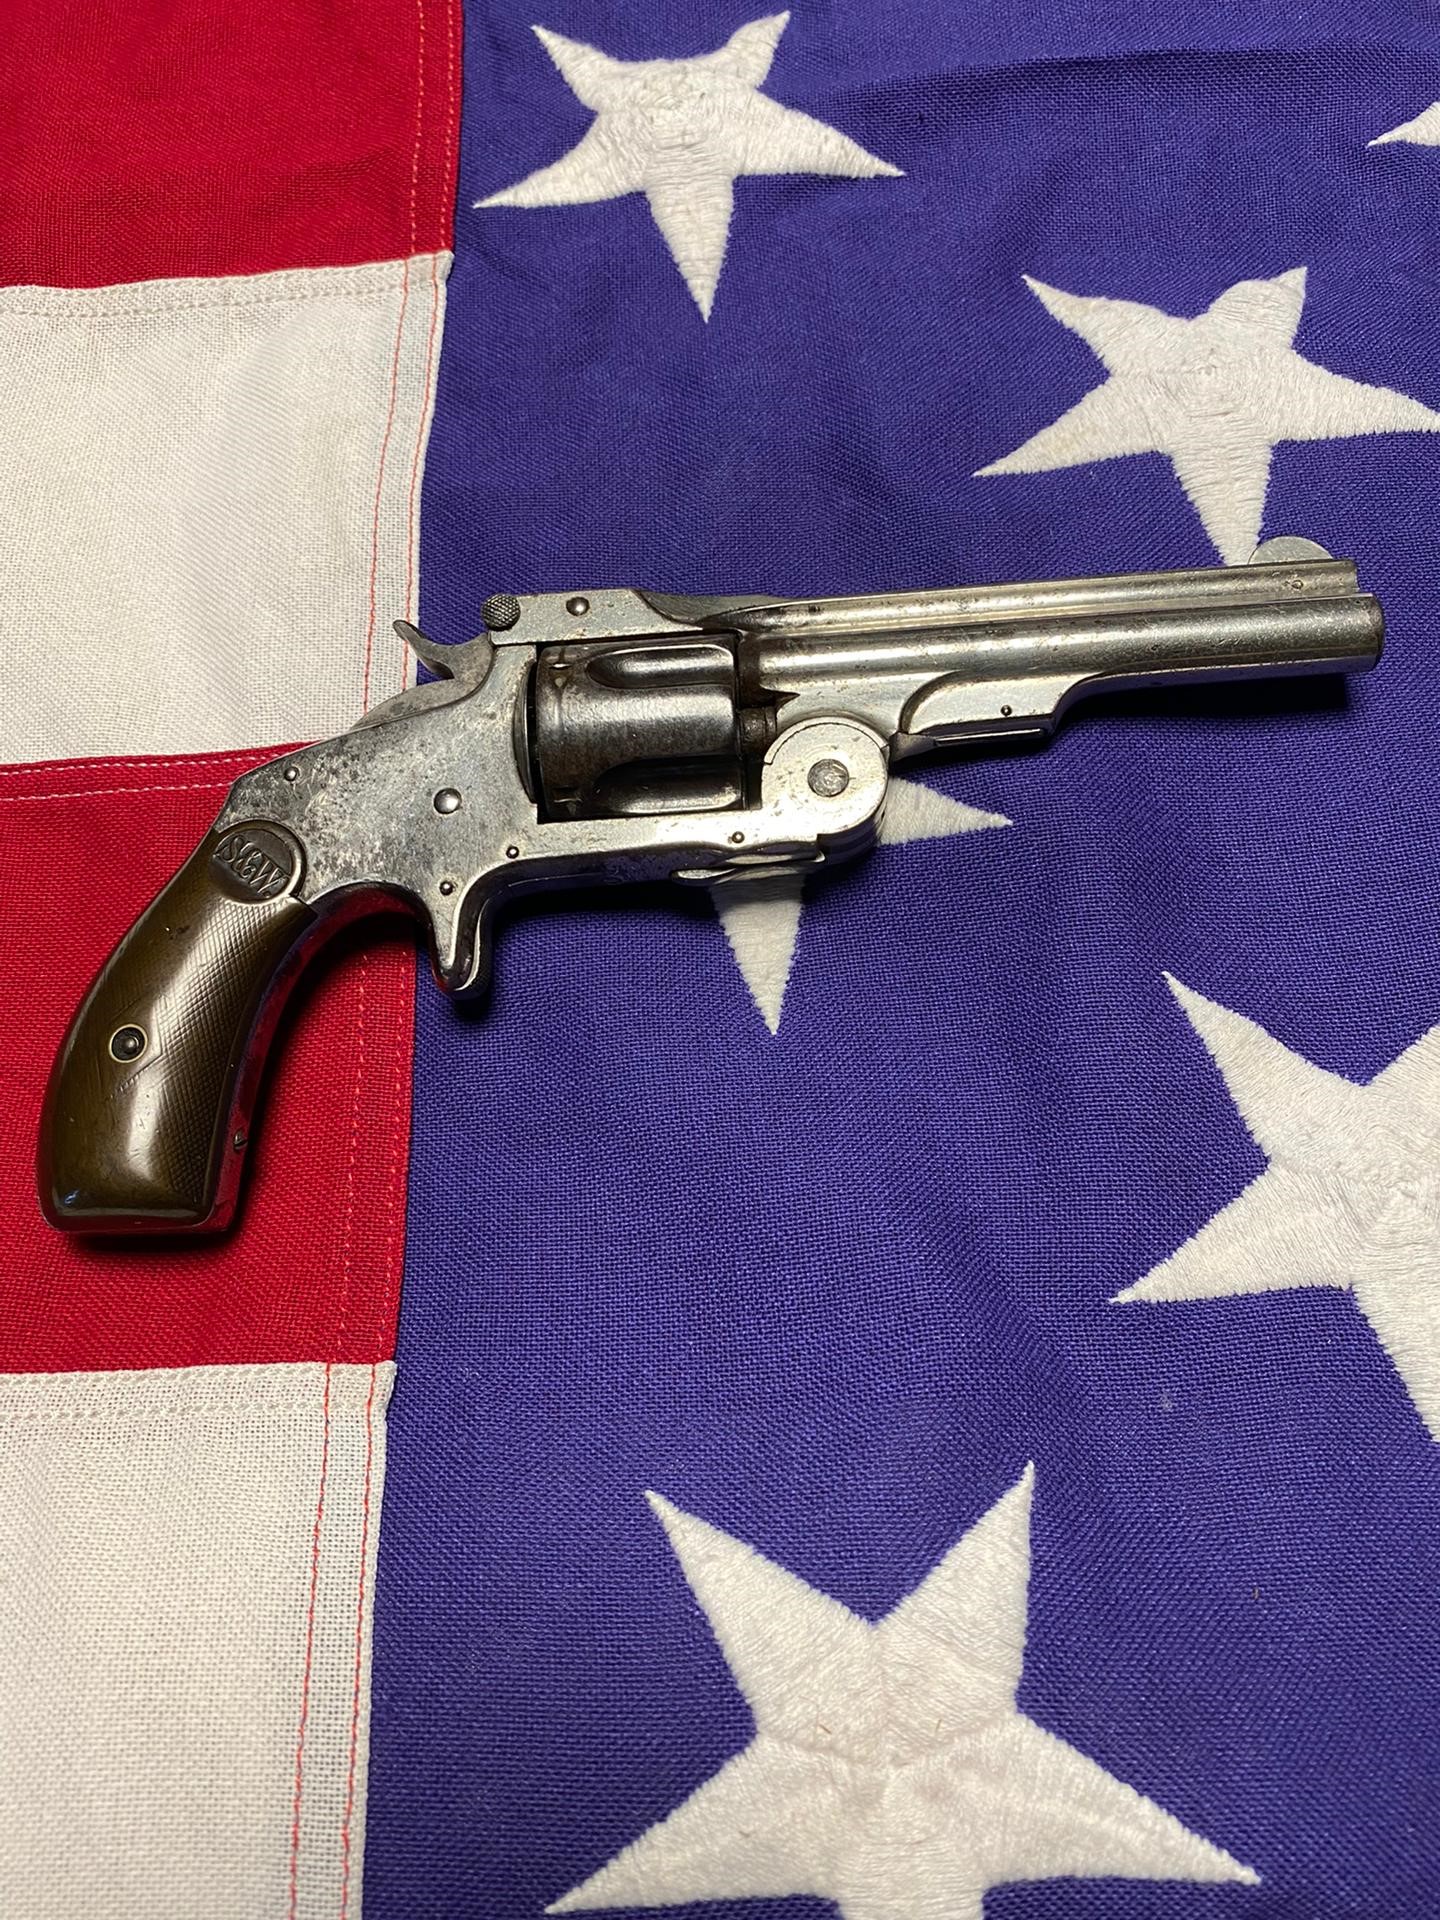 Smith & Wesson 38 Single Action First Model (aka Baby Russian)